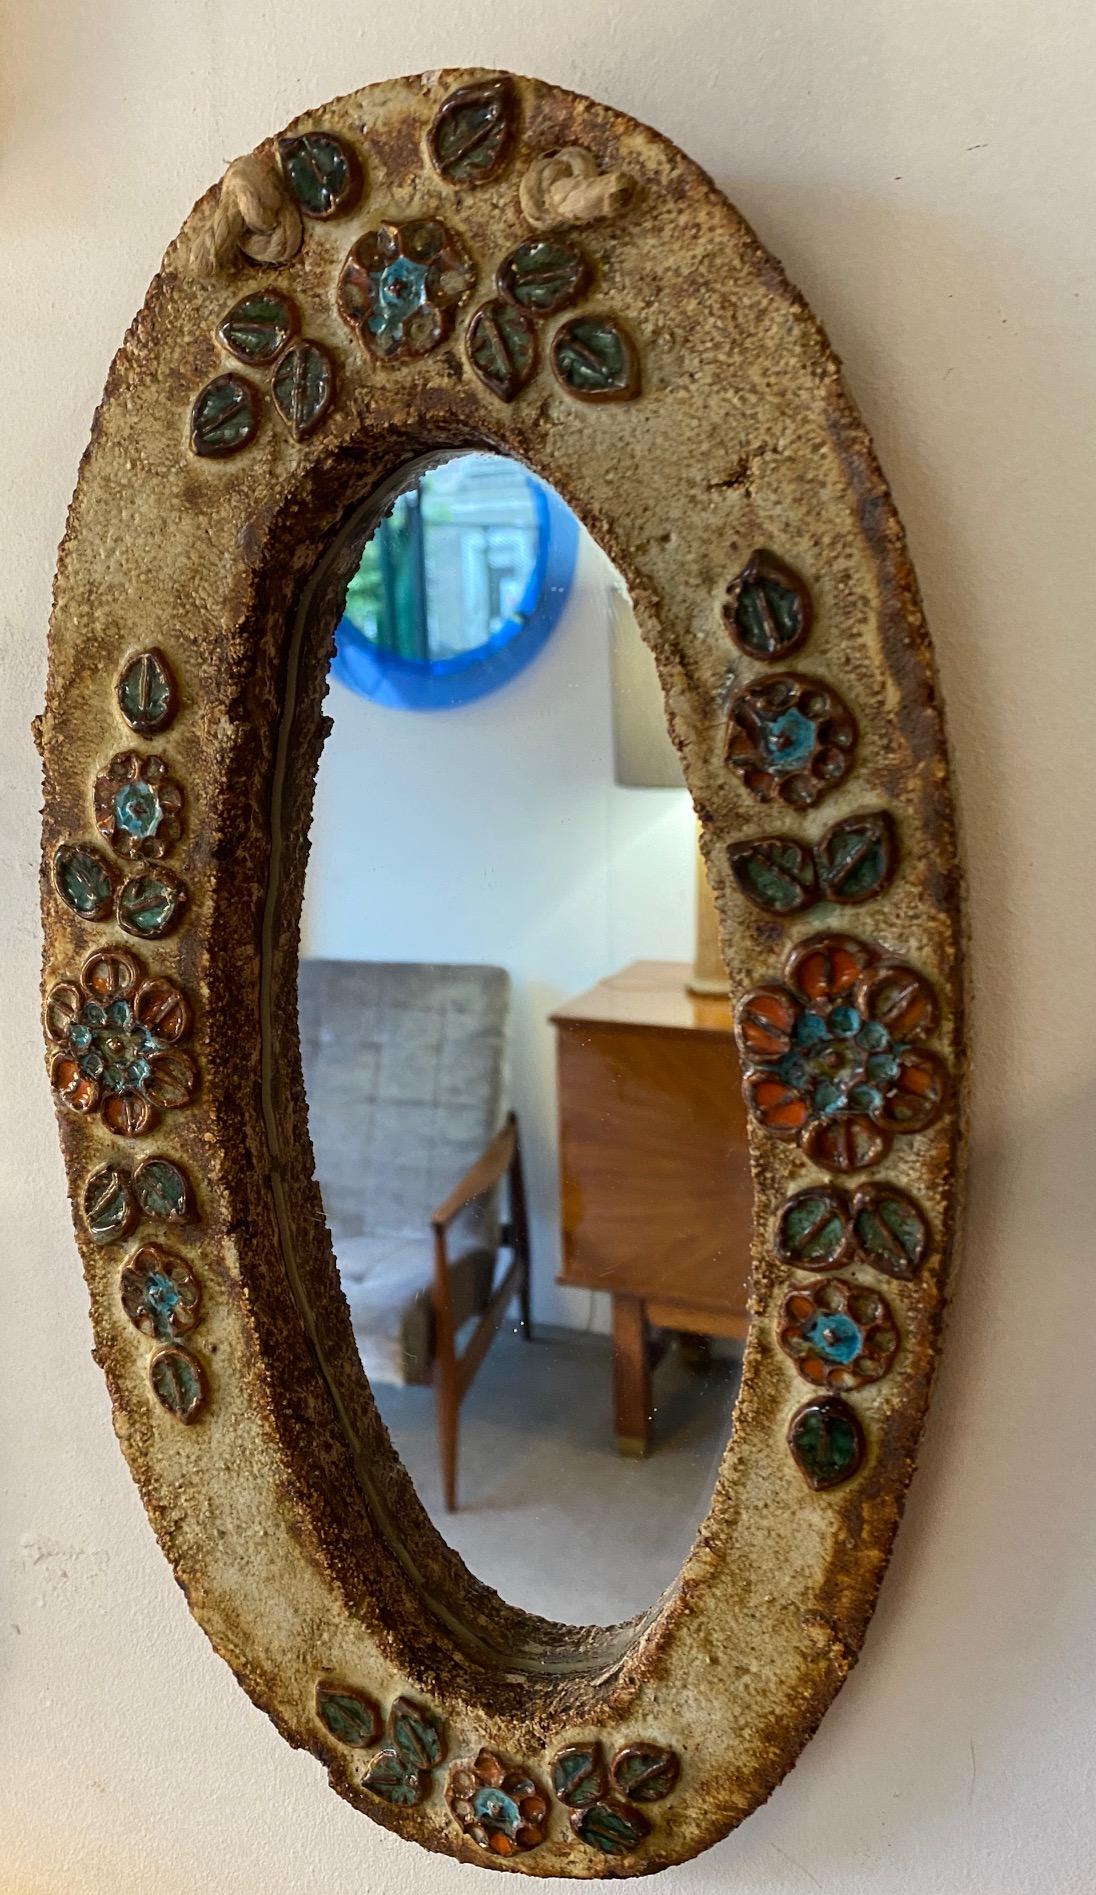 Ceramic mirror, France, Vallauris, 1960s.
Attributed to Les Argonautes (Frédérique Bourguet and Isabelle Ferlay), French workshop created in Vallauris, south of France, in 1953 and active until the death of Federique Bourguet in 1997.